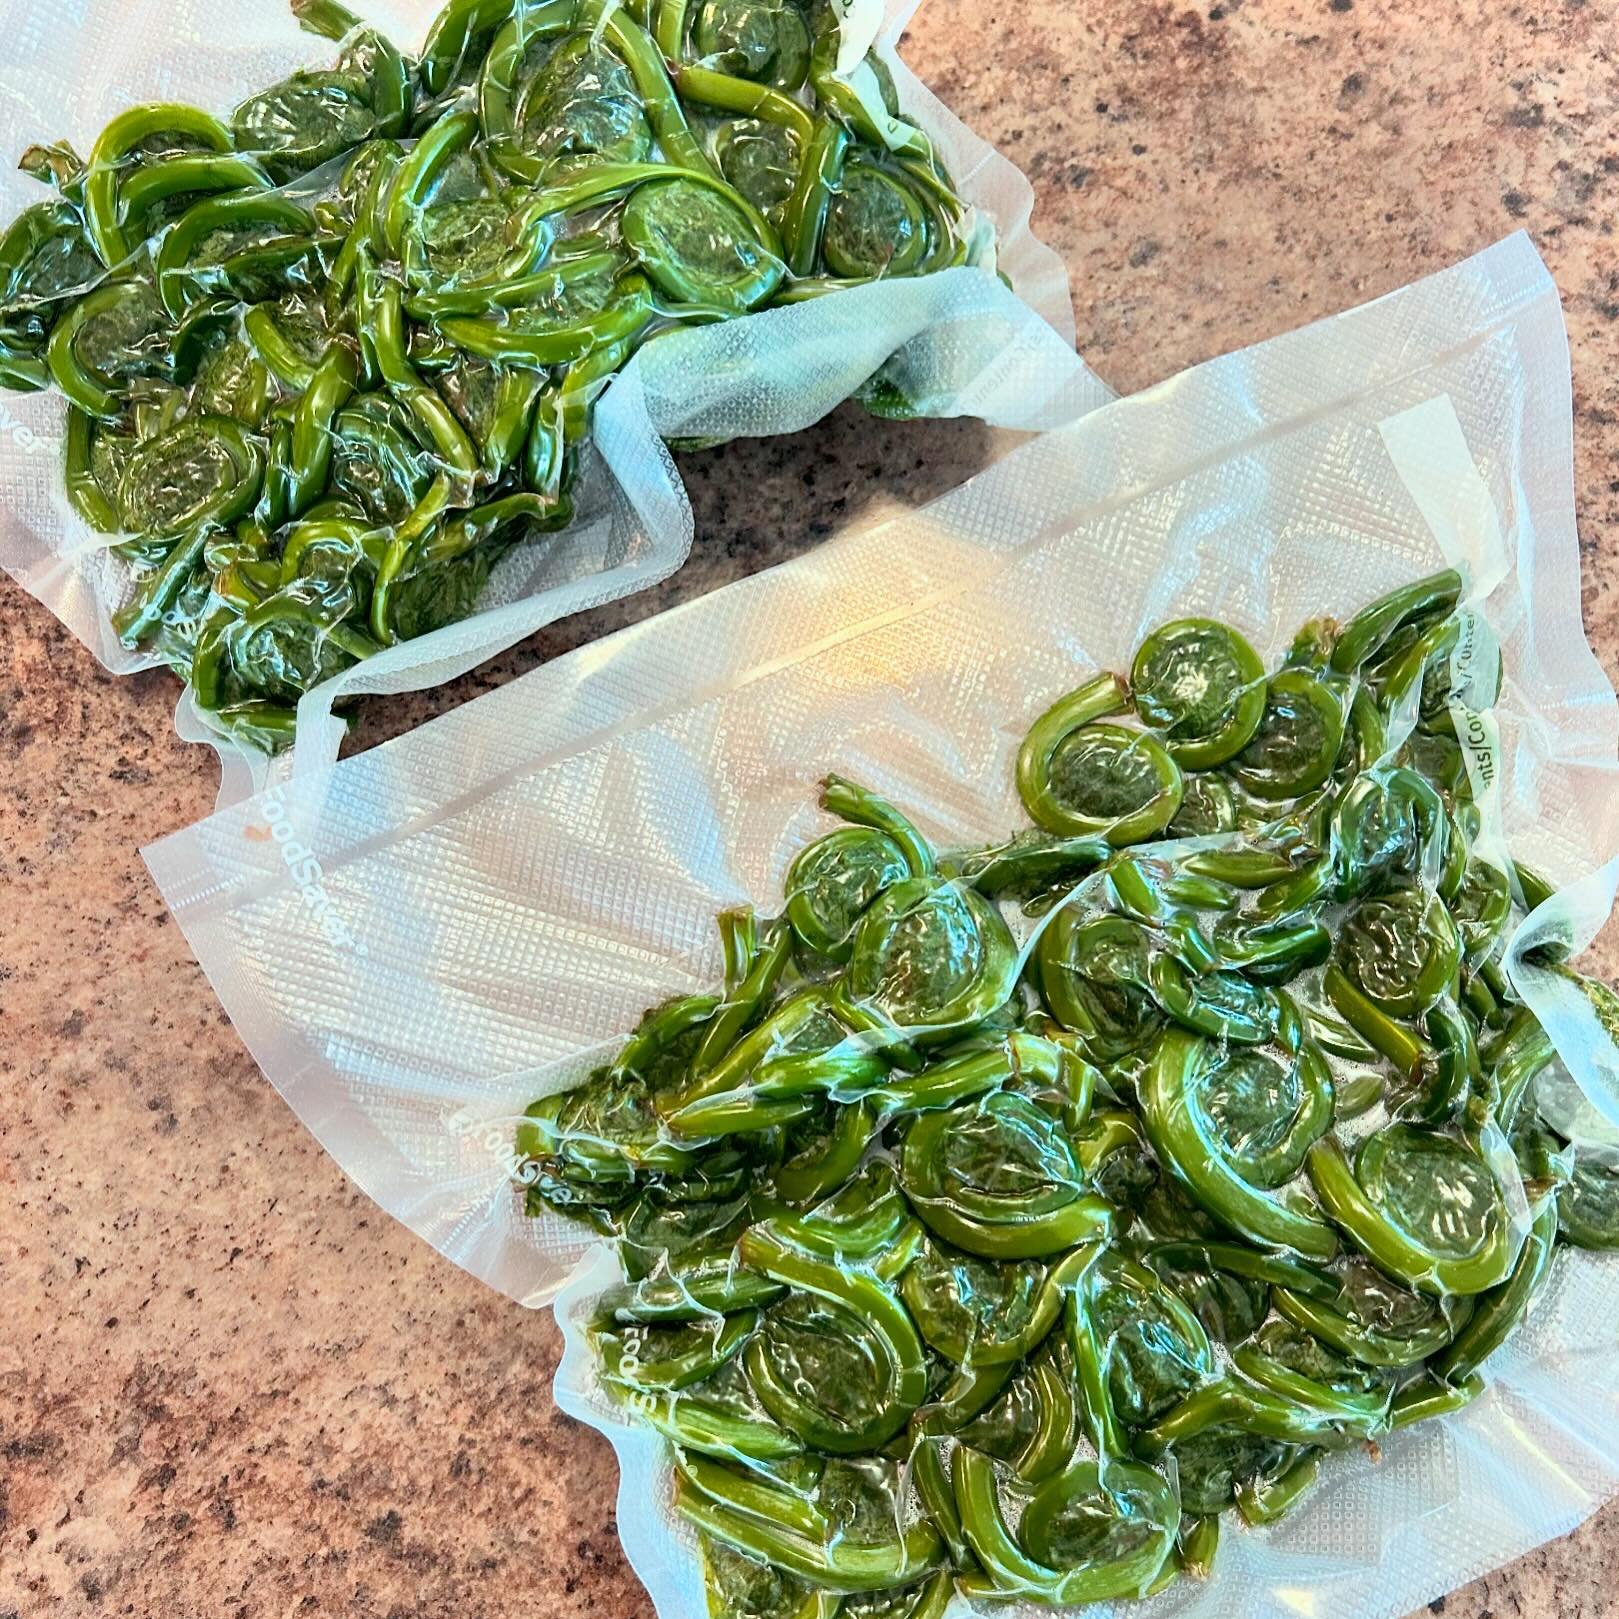 SUNDAY! Someone changed their mind about fiddleheads so we have TWO 1 lb bags available. Locally foraged by our friends at @rockyacreshomestead and vacuum sealed! We&rsquo;re here until 4pm today!